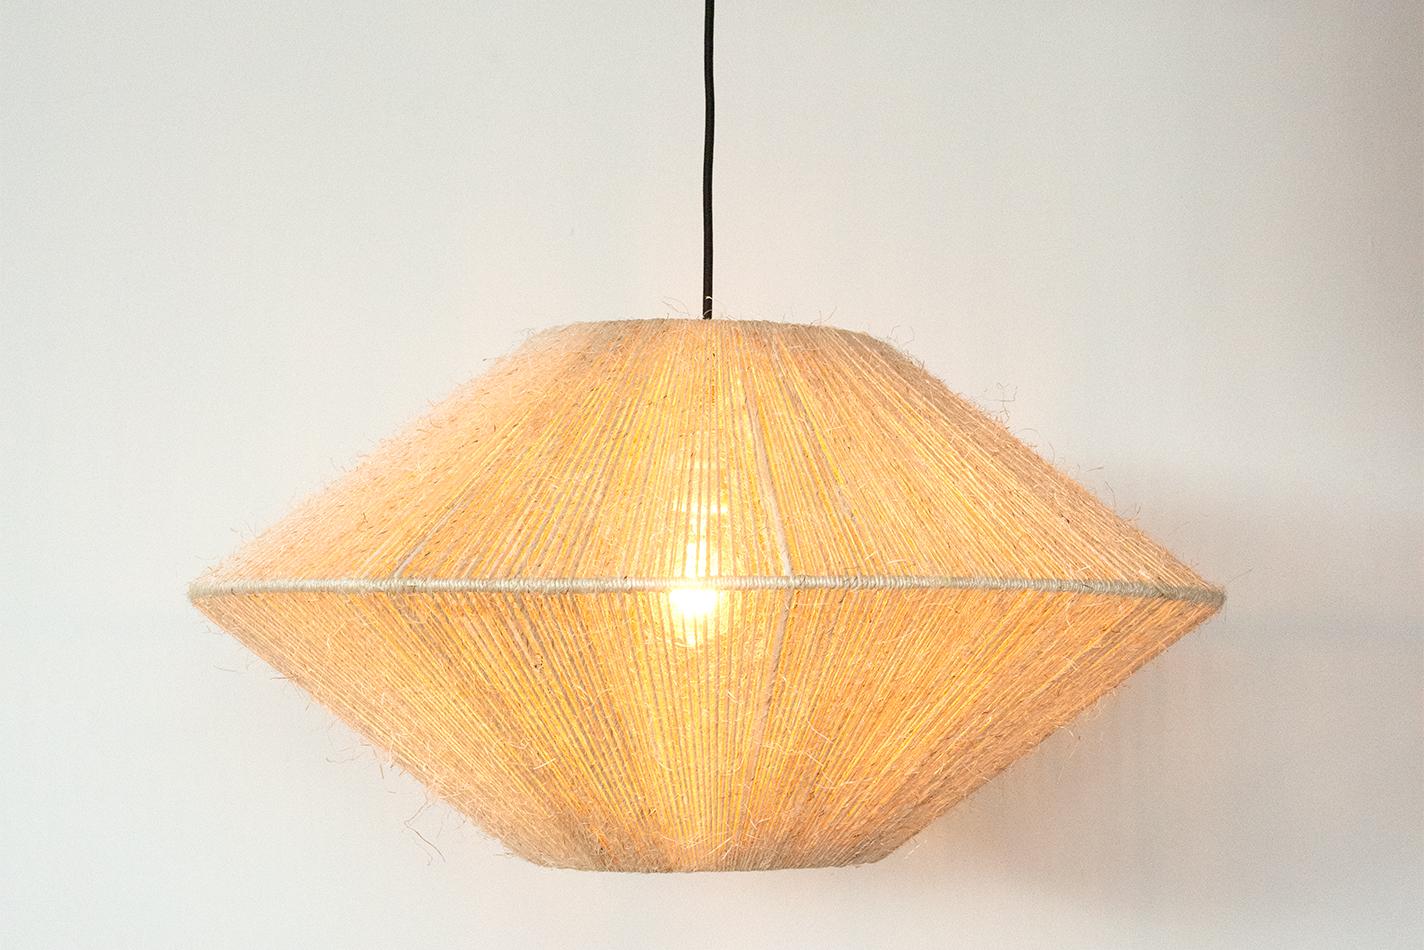 This Handwoven Henequén Hunter light screen is a unique creation by León León Design from Mexico City. 
Henequén is the name for the Agave fibers used to make this special weaving rope. The same Agave that gives us Tequila and Mezcal. 

The